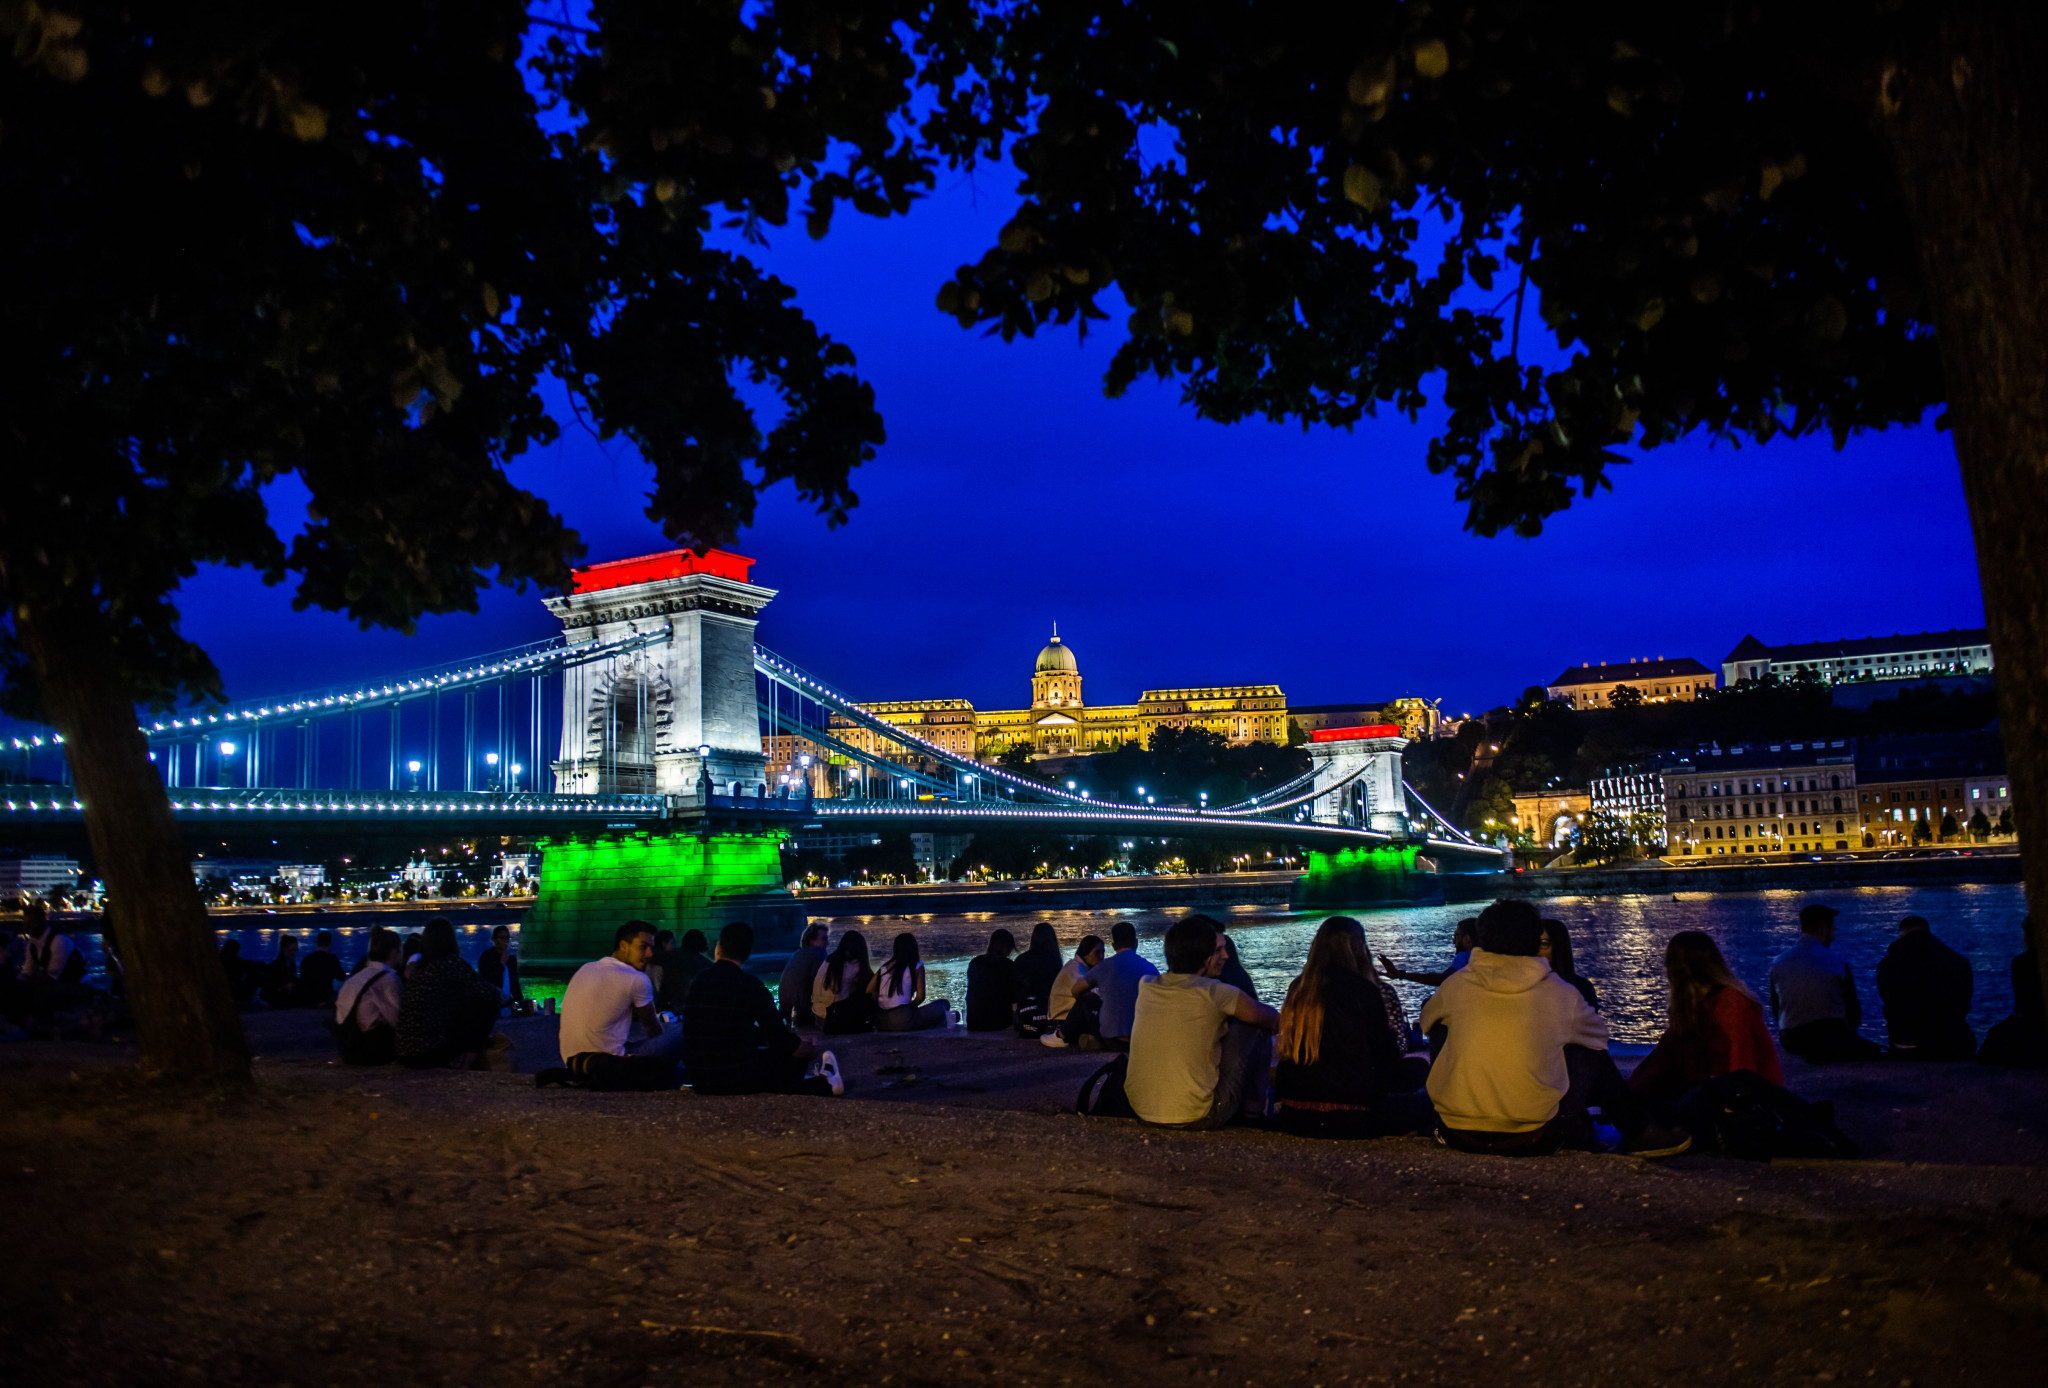 Budapest 2032 Committee to continue to study feasibility of Olympic bid